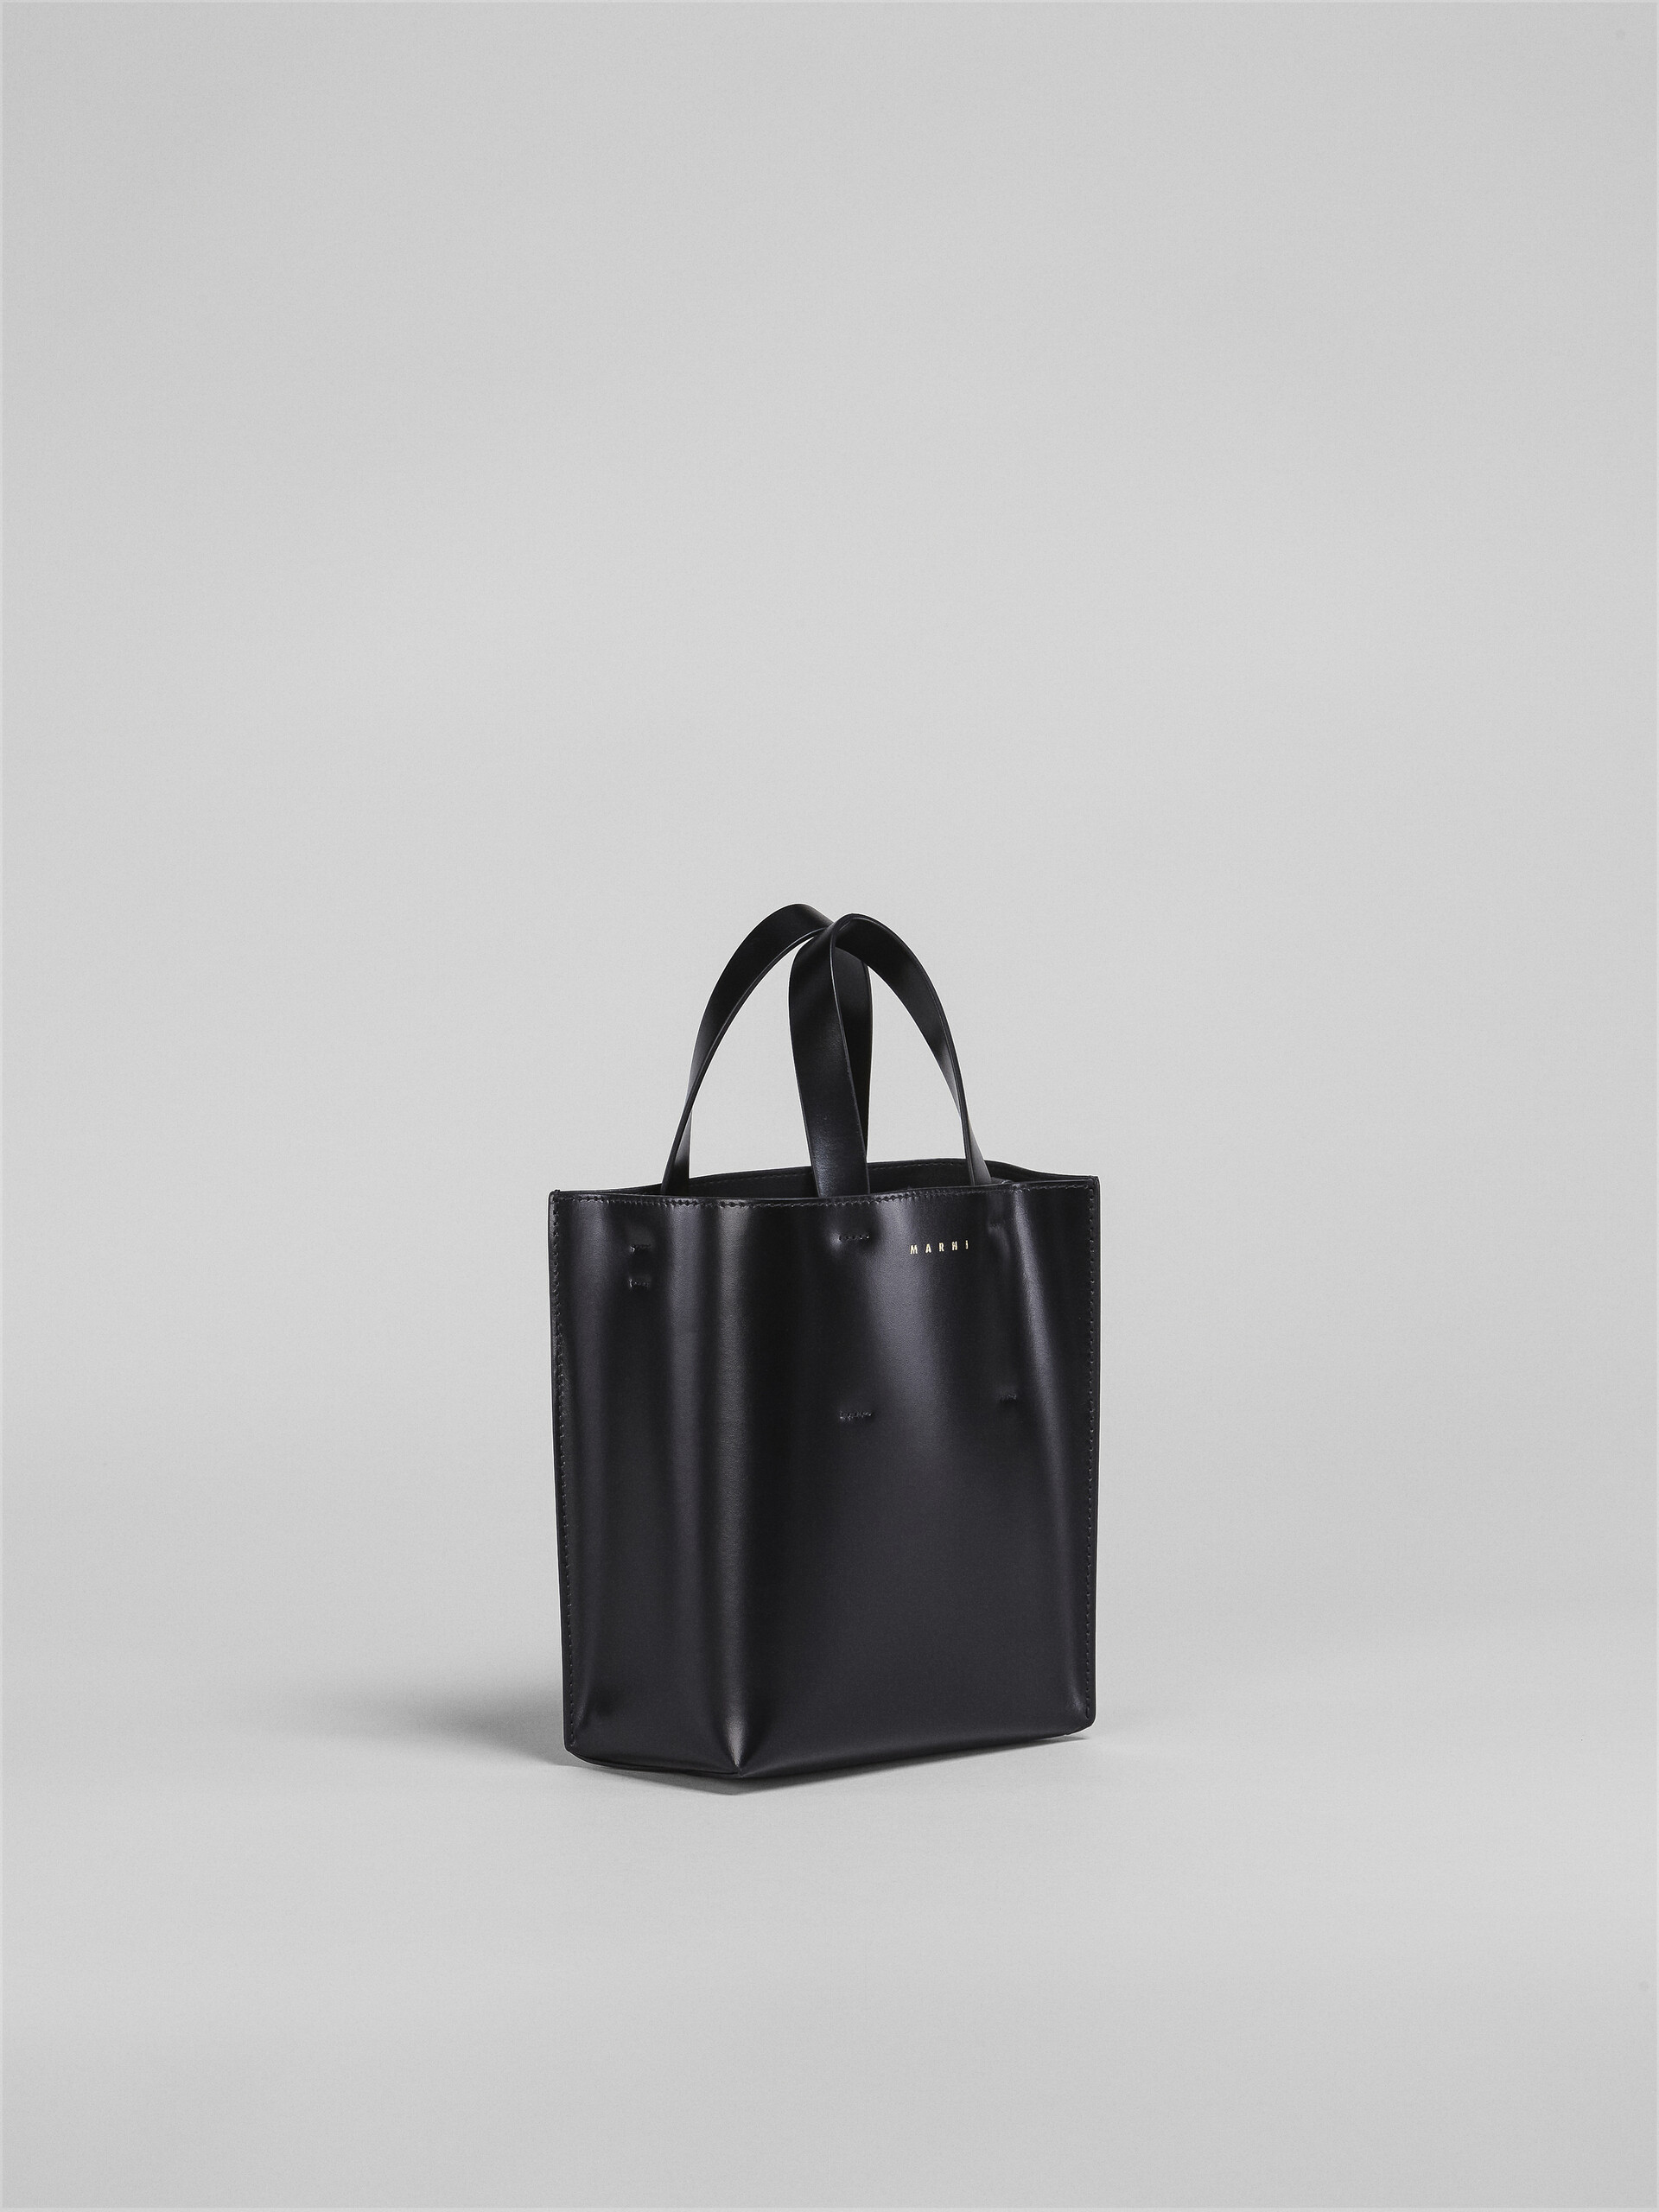 Bi-coloured MUSEO bag in shiny calfskin with shoulder strap - Shopping Bags - Image 6